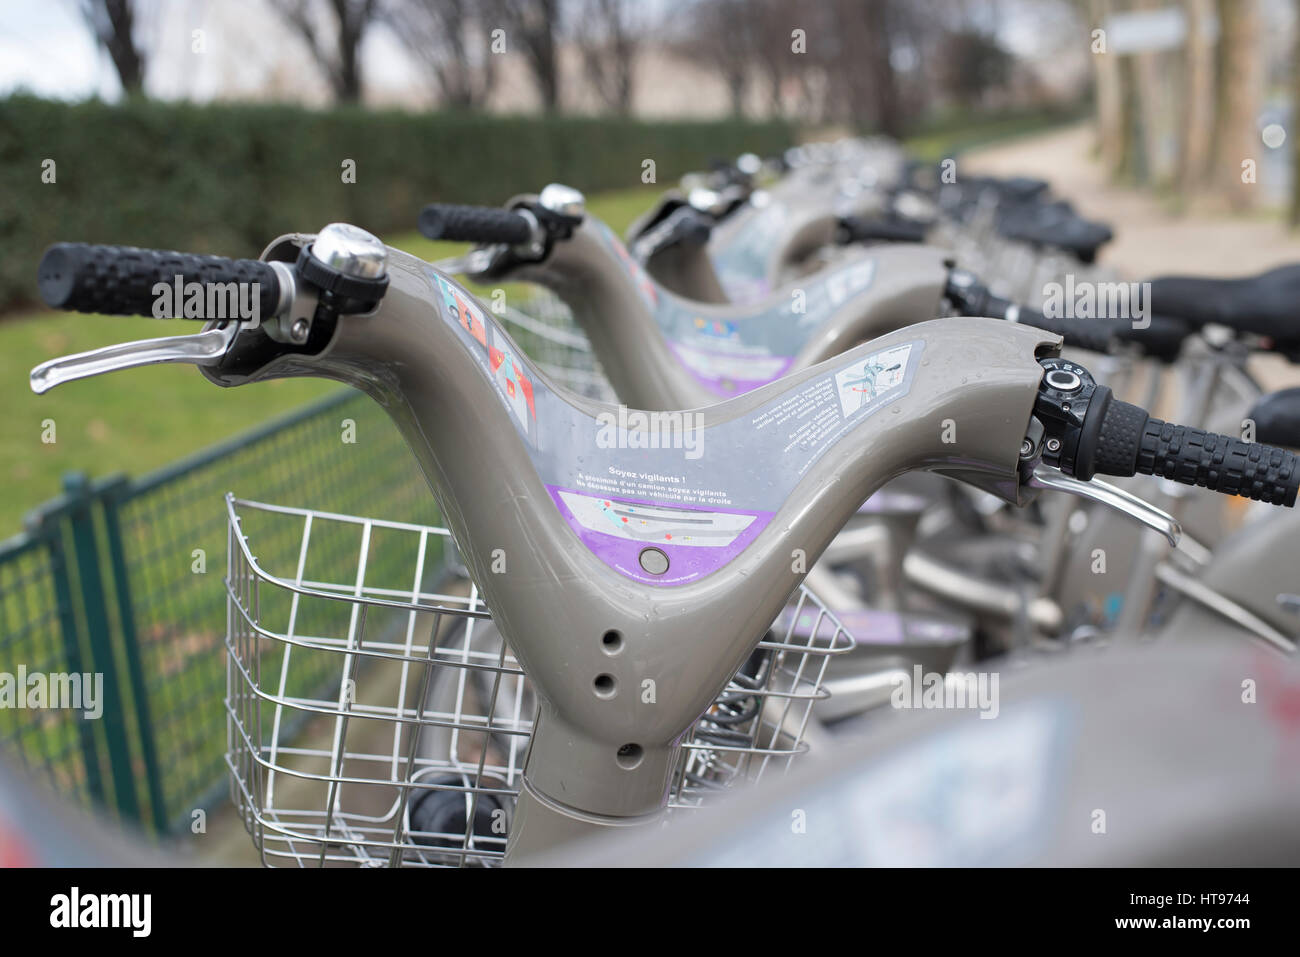 Looking over the handle bars of a row of Velib rental bicycles in Paris France. Stock Photo